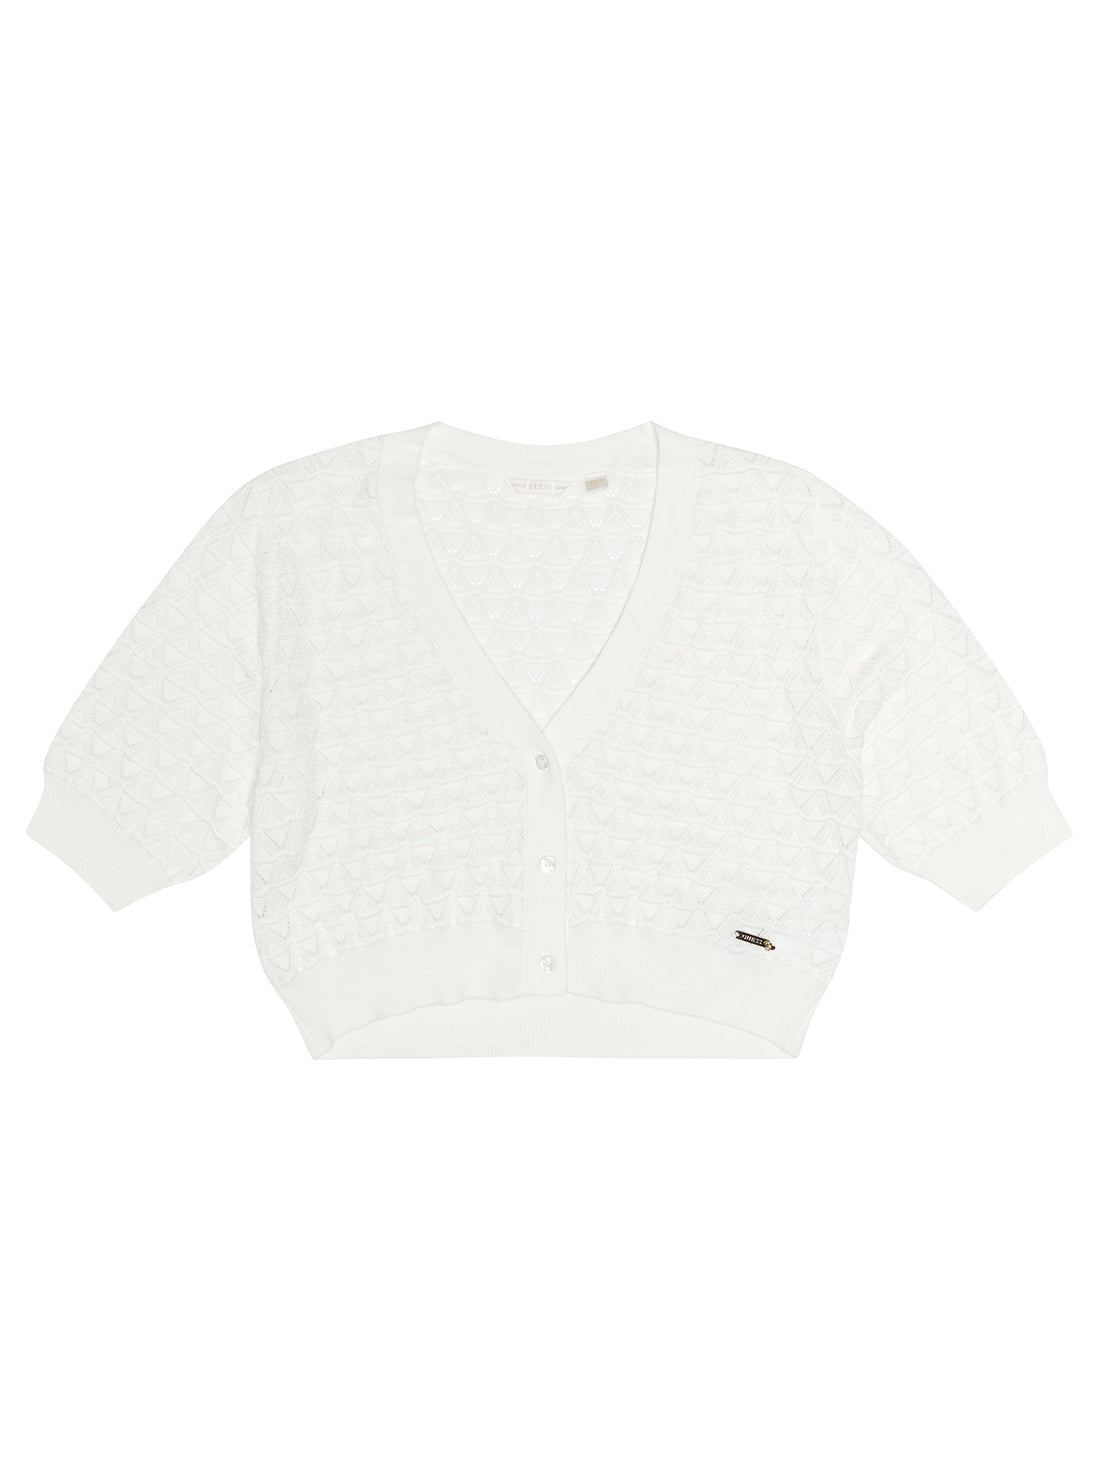 Girl's White Knit Short Sleeve Cardigan (7-16) | GUESS Kids | front view